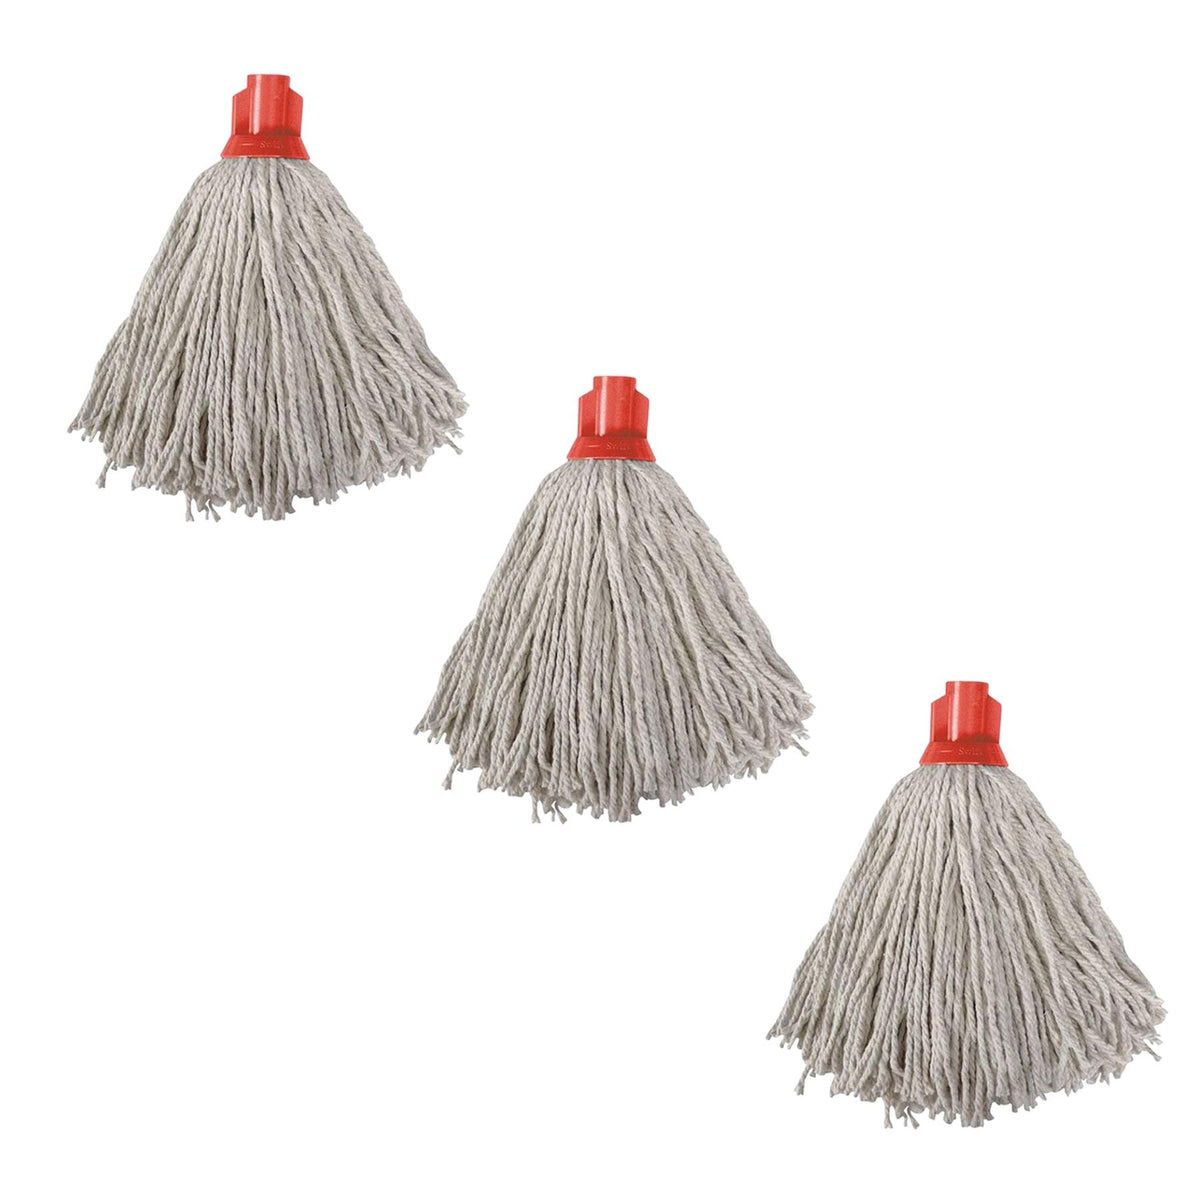 Swift PY Cotton Socket Mop, Pack of 3 Red